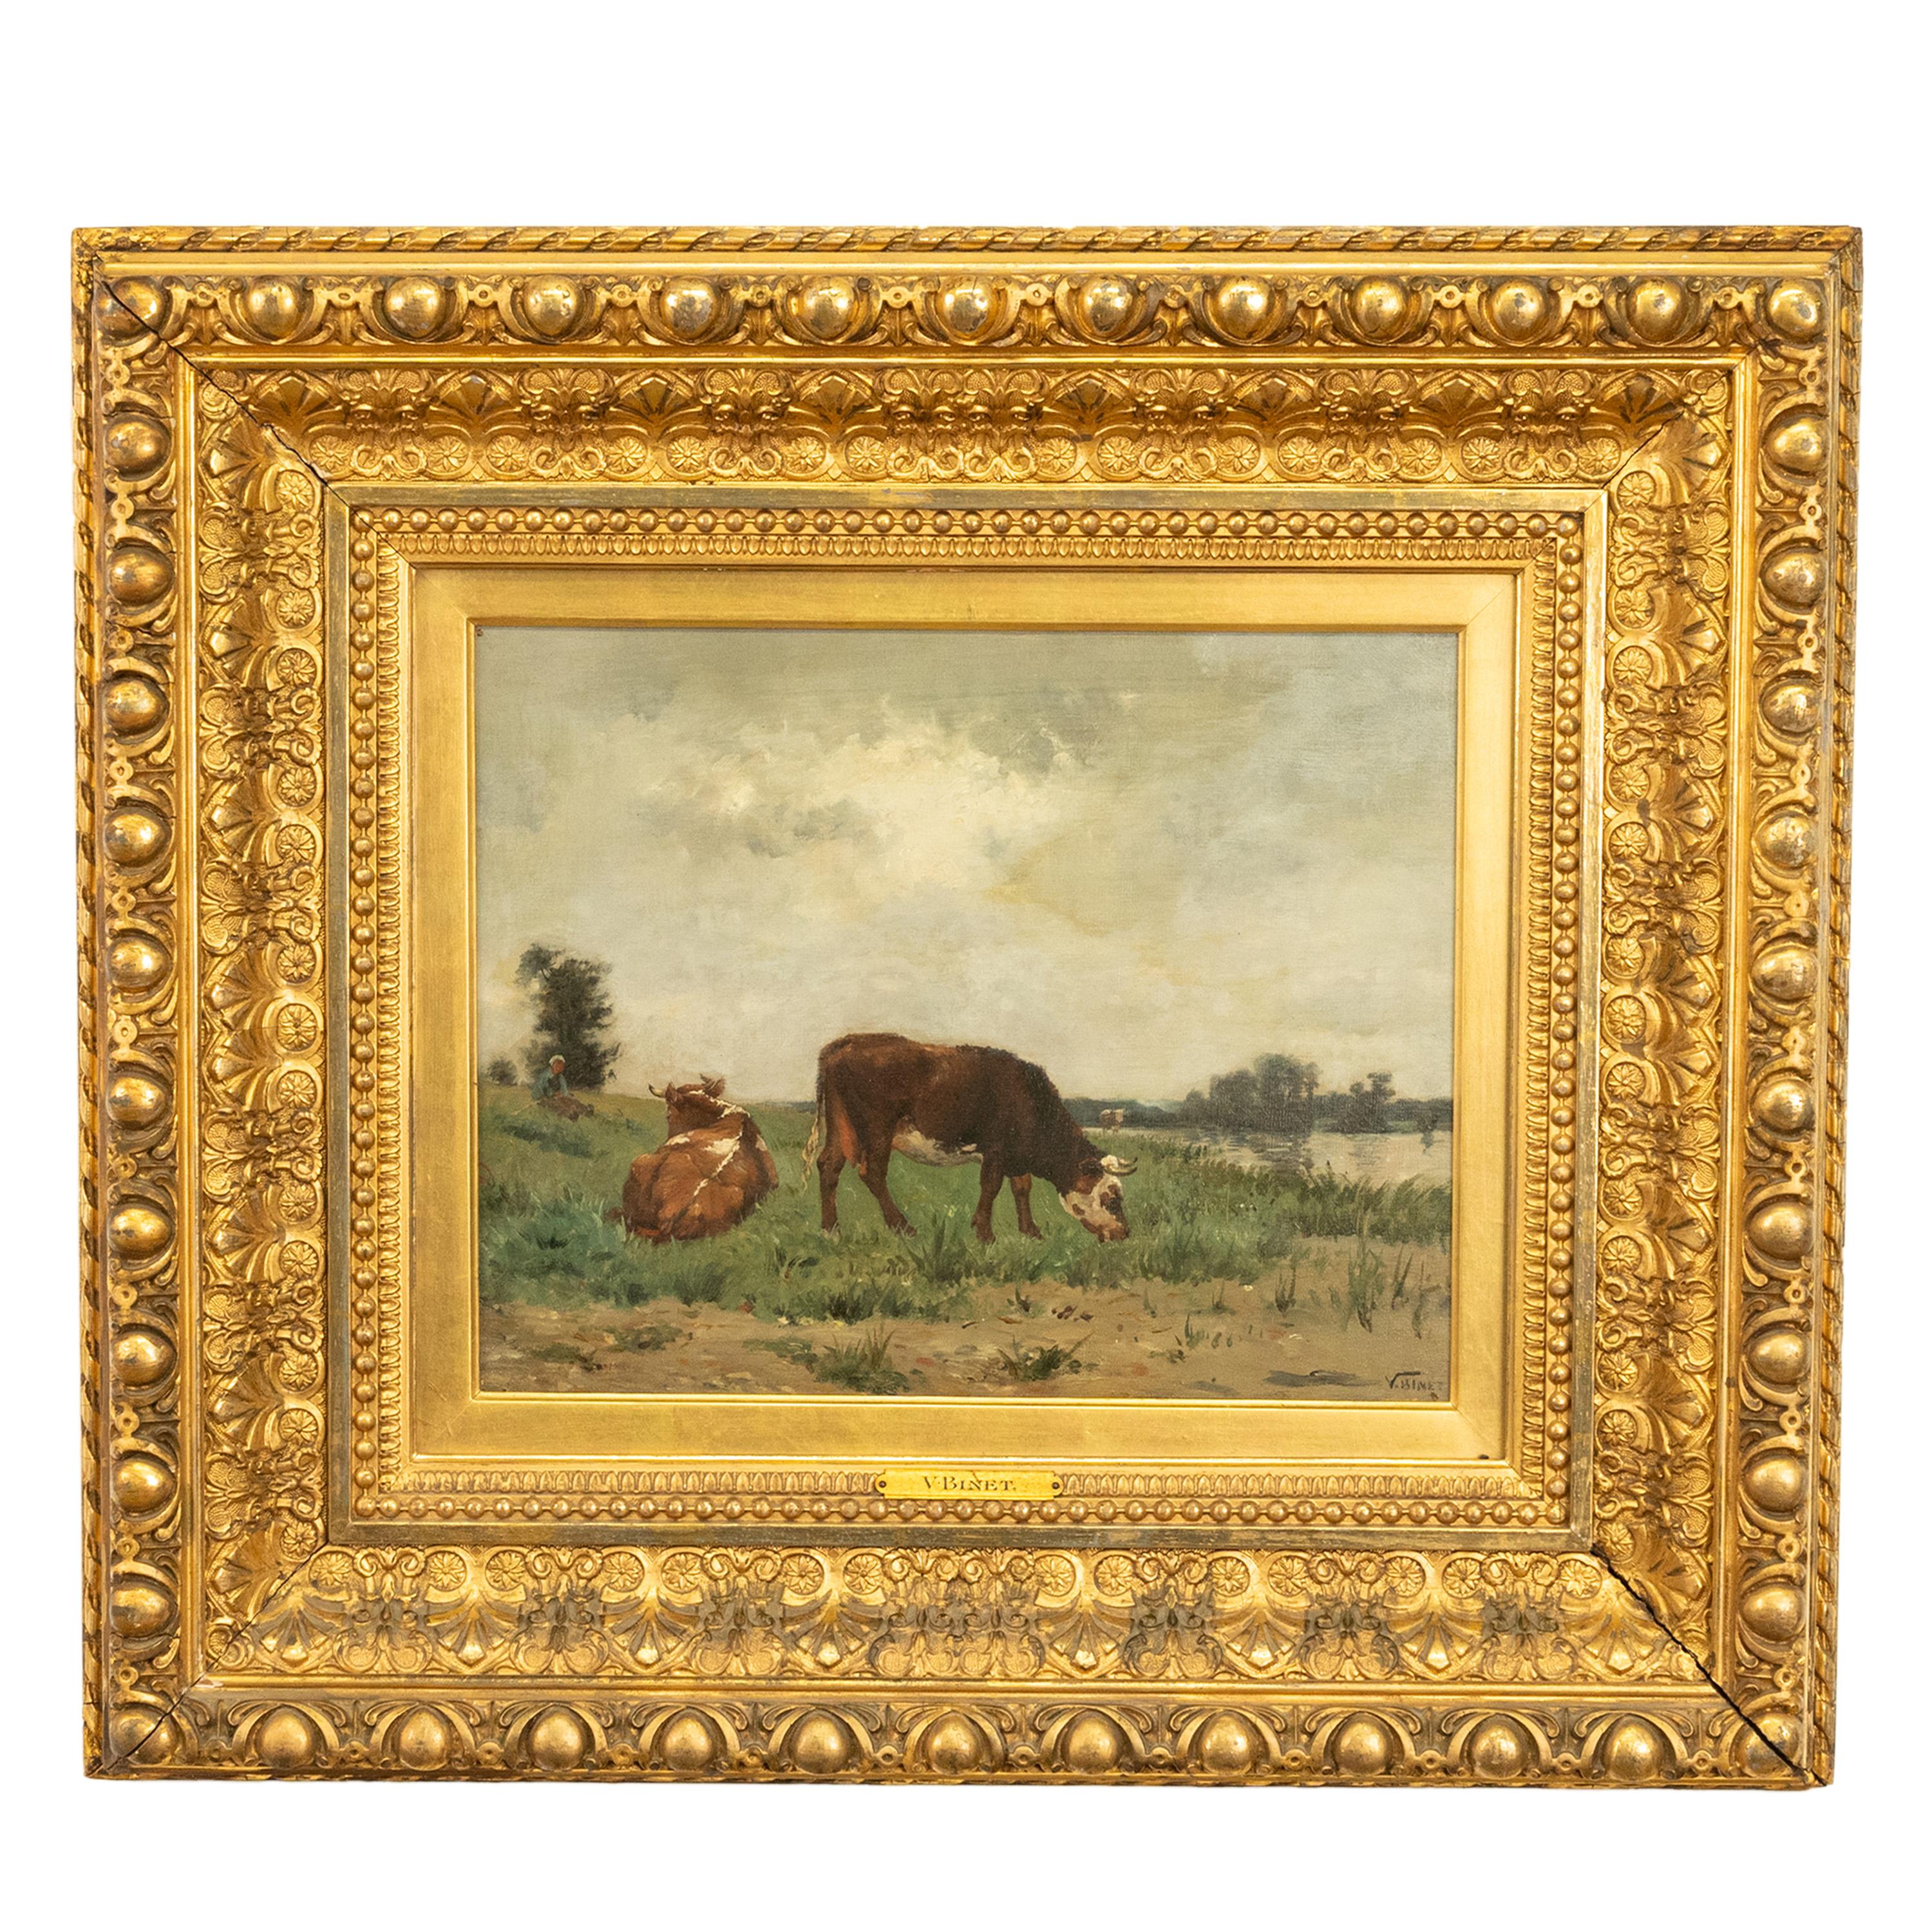 VICTOR JEAN BAPTISTE BARTHELEMY BINET 
French, 1849-1924
This very attractive & early painting, circa 1875 by Binet, quintessentially defines the late Barbizon School period. Depicting a pair of cows in a bucolic landscape, one grazing and one